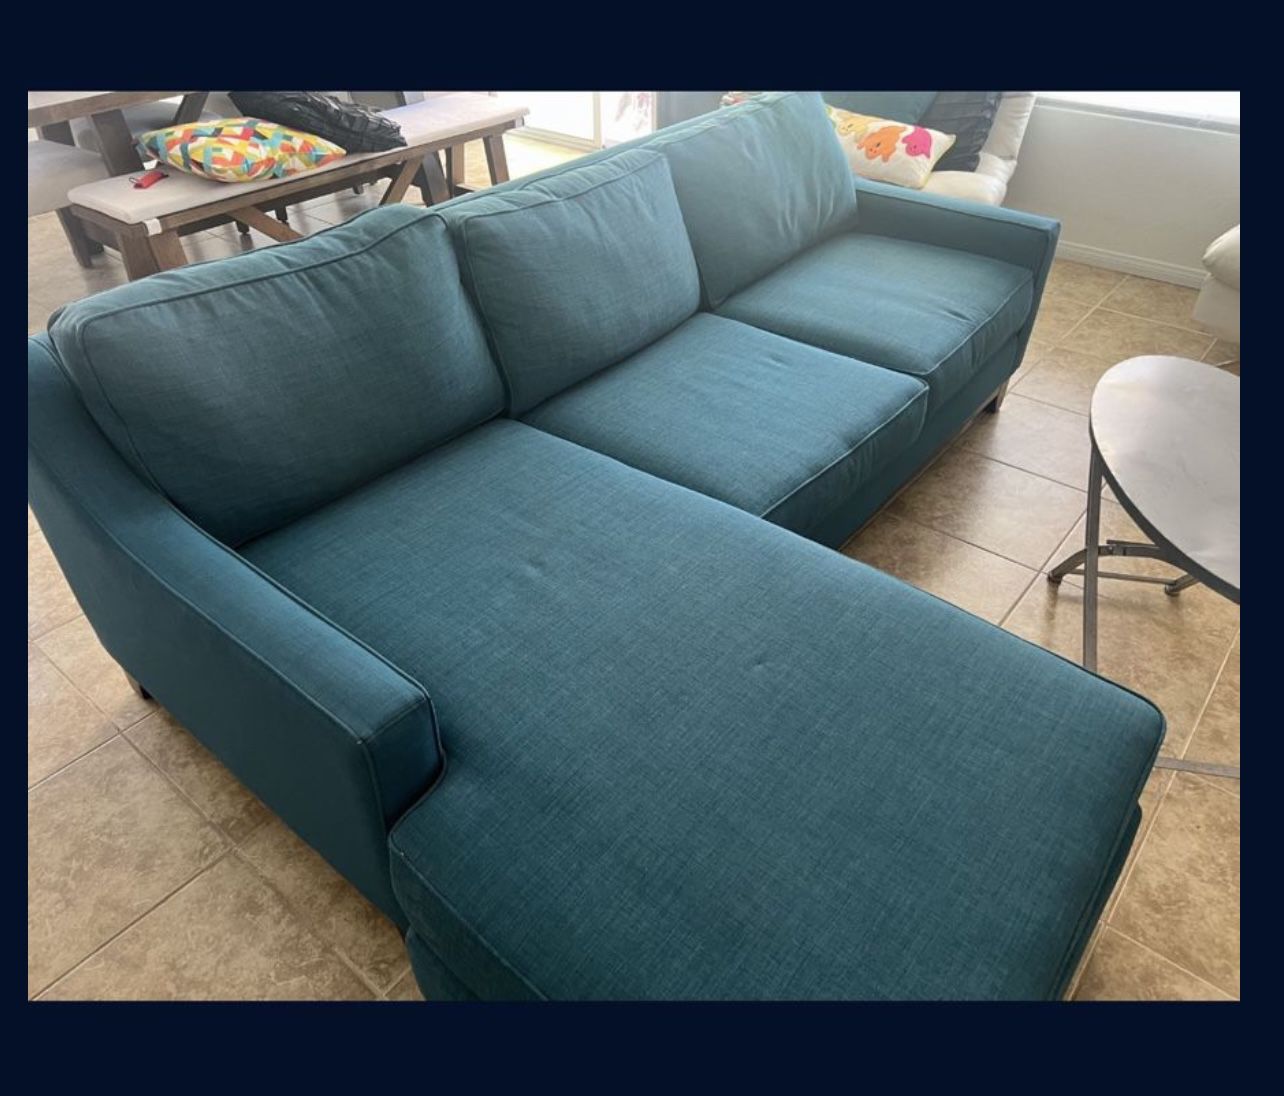 Teal Mid century Couch